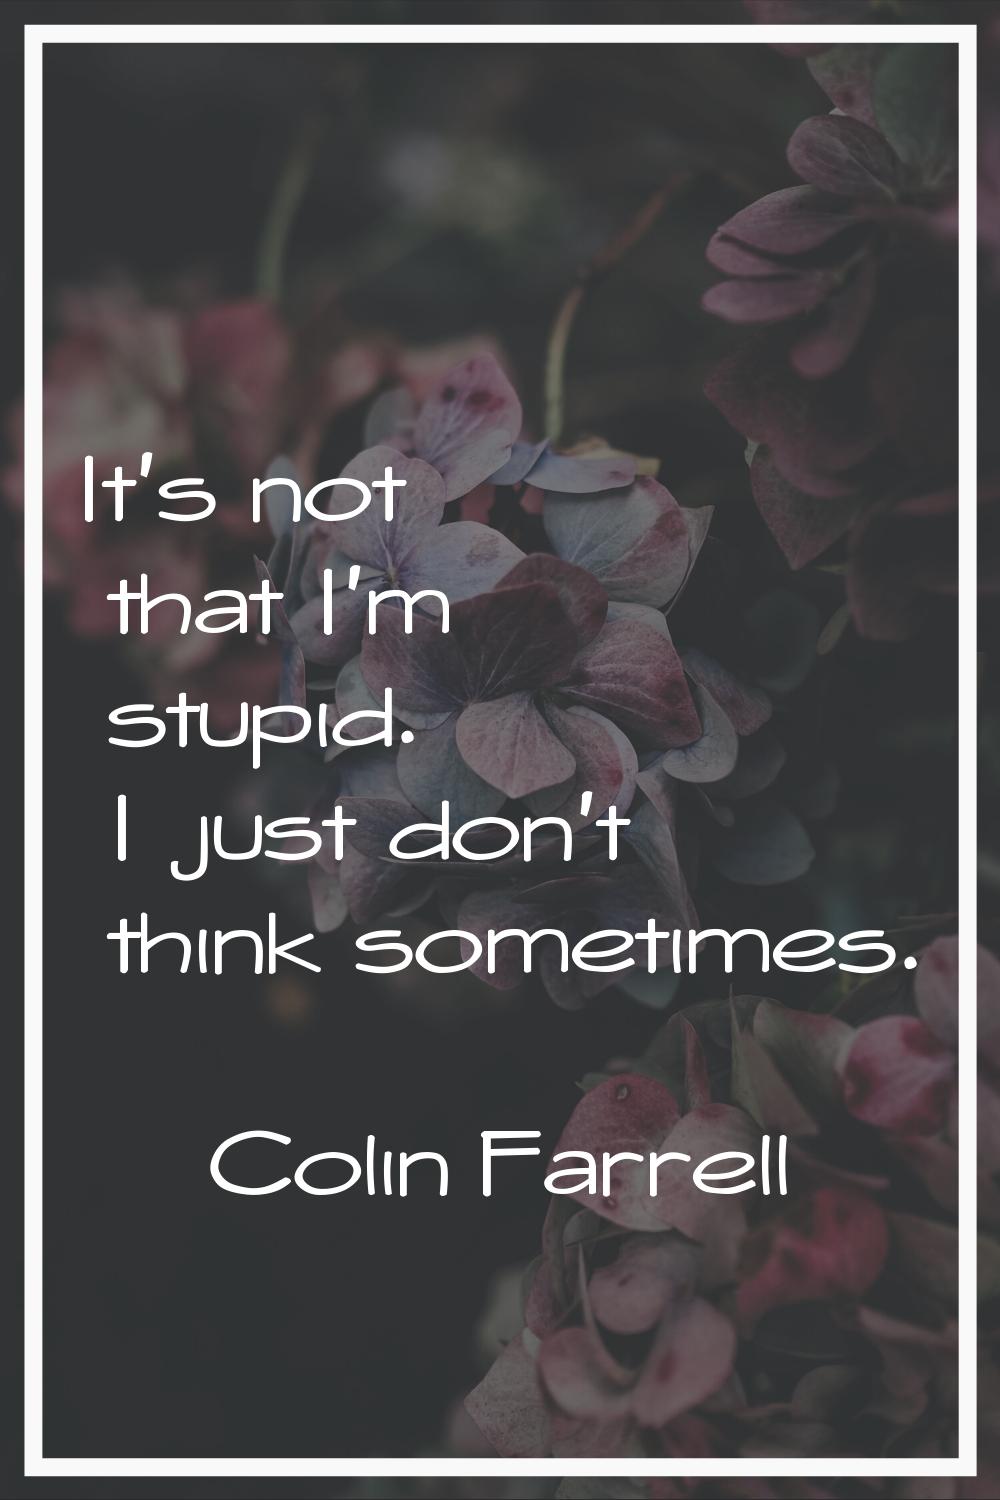 It's not that I'm stupid. I just don't think sometimes.